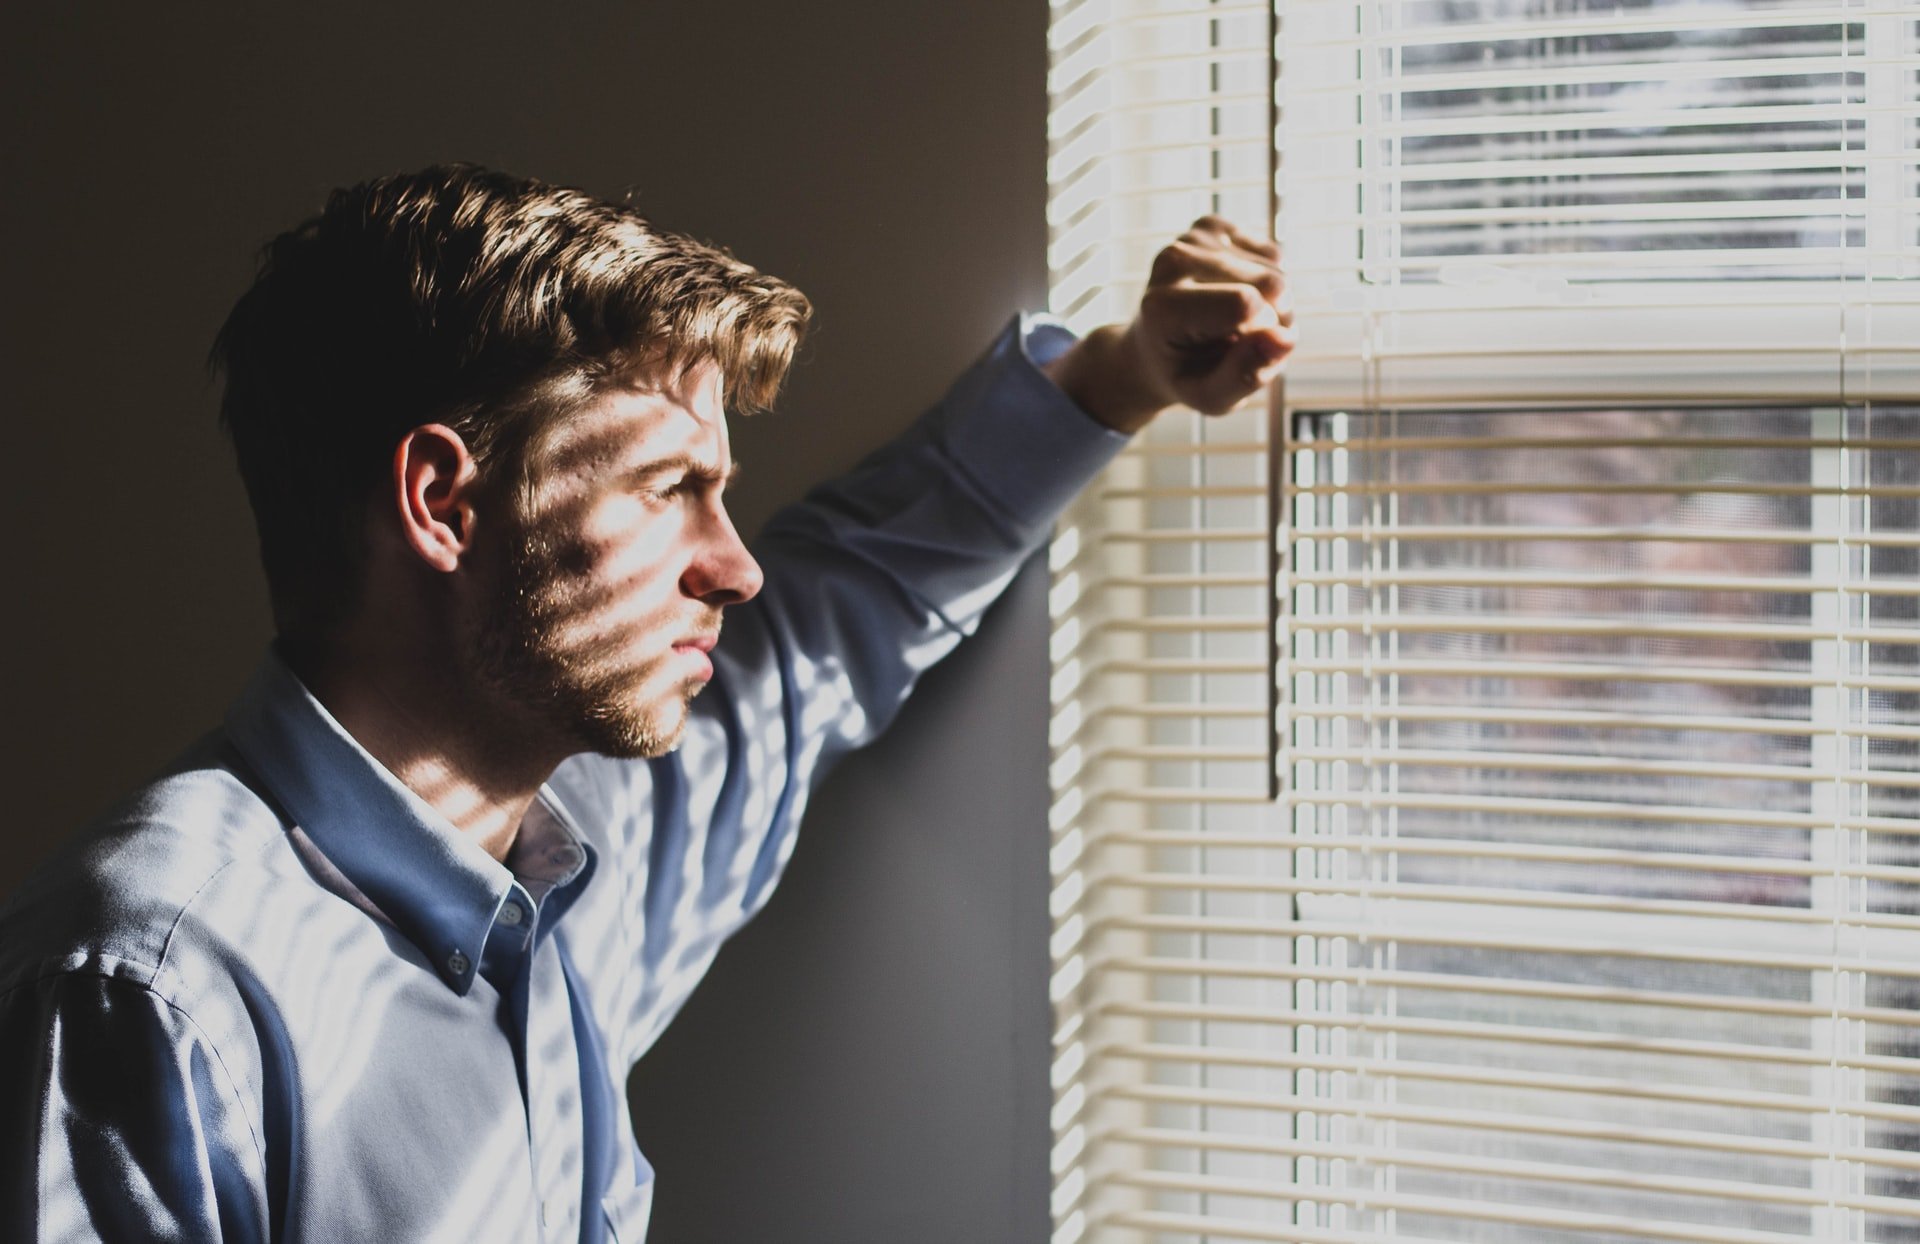 A man looking out the window in thought | Source: Unsplash